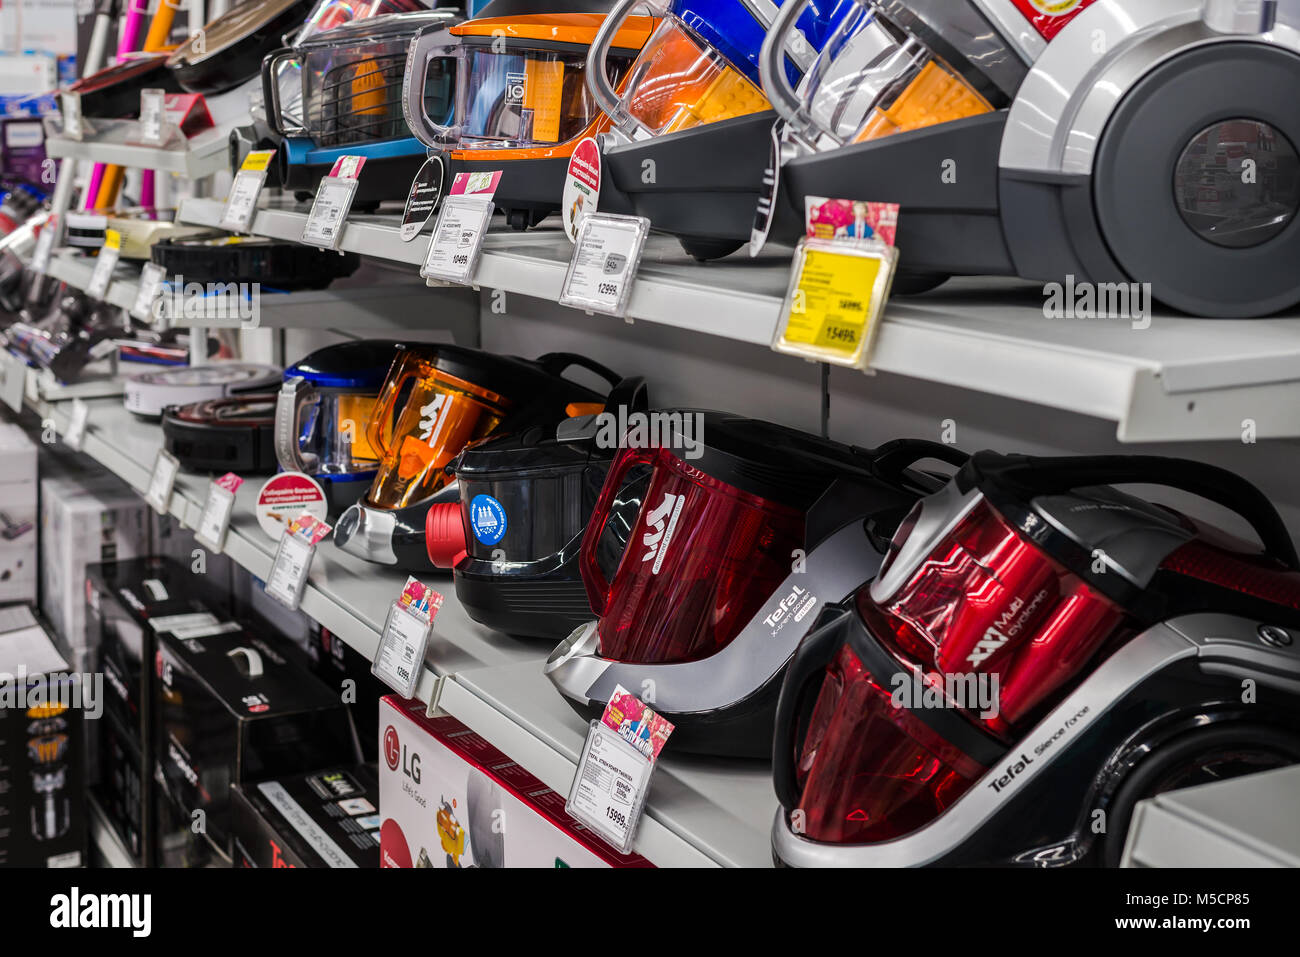 Moscow, Russia - February 20, 2018. Vacuum cleaners in electronics store Eldorado Stock Photo